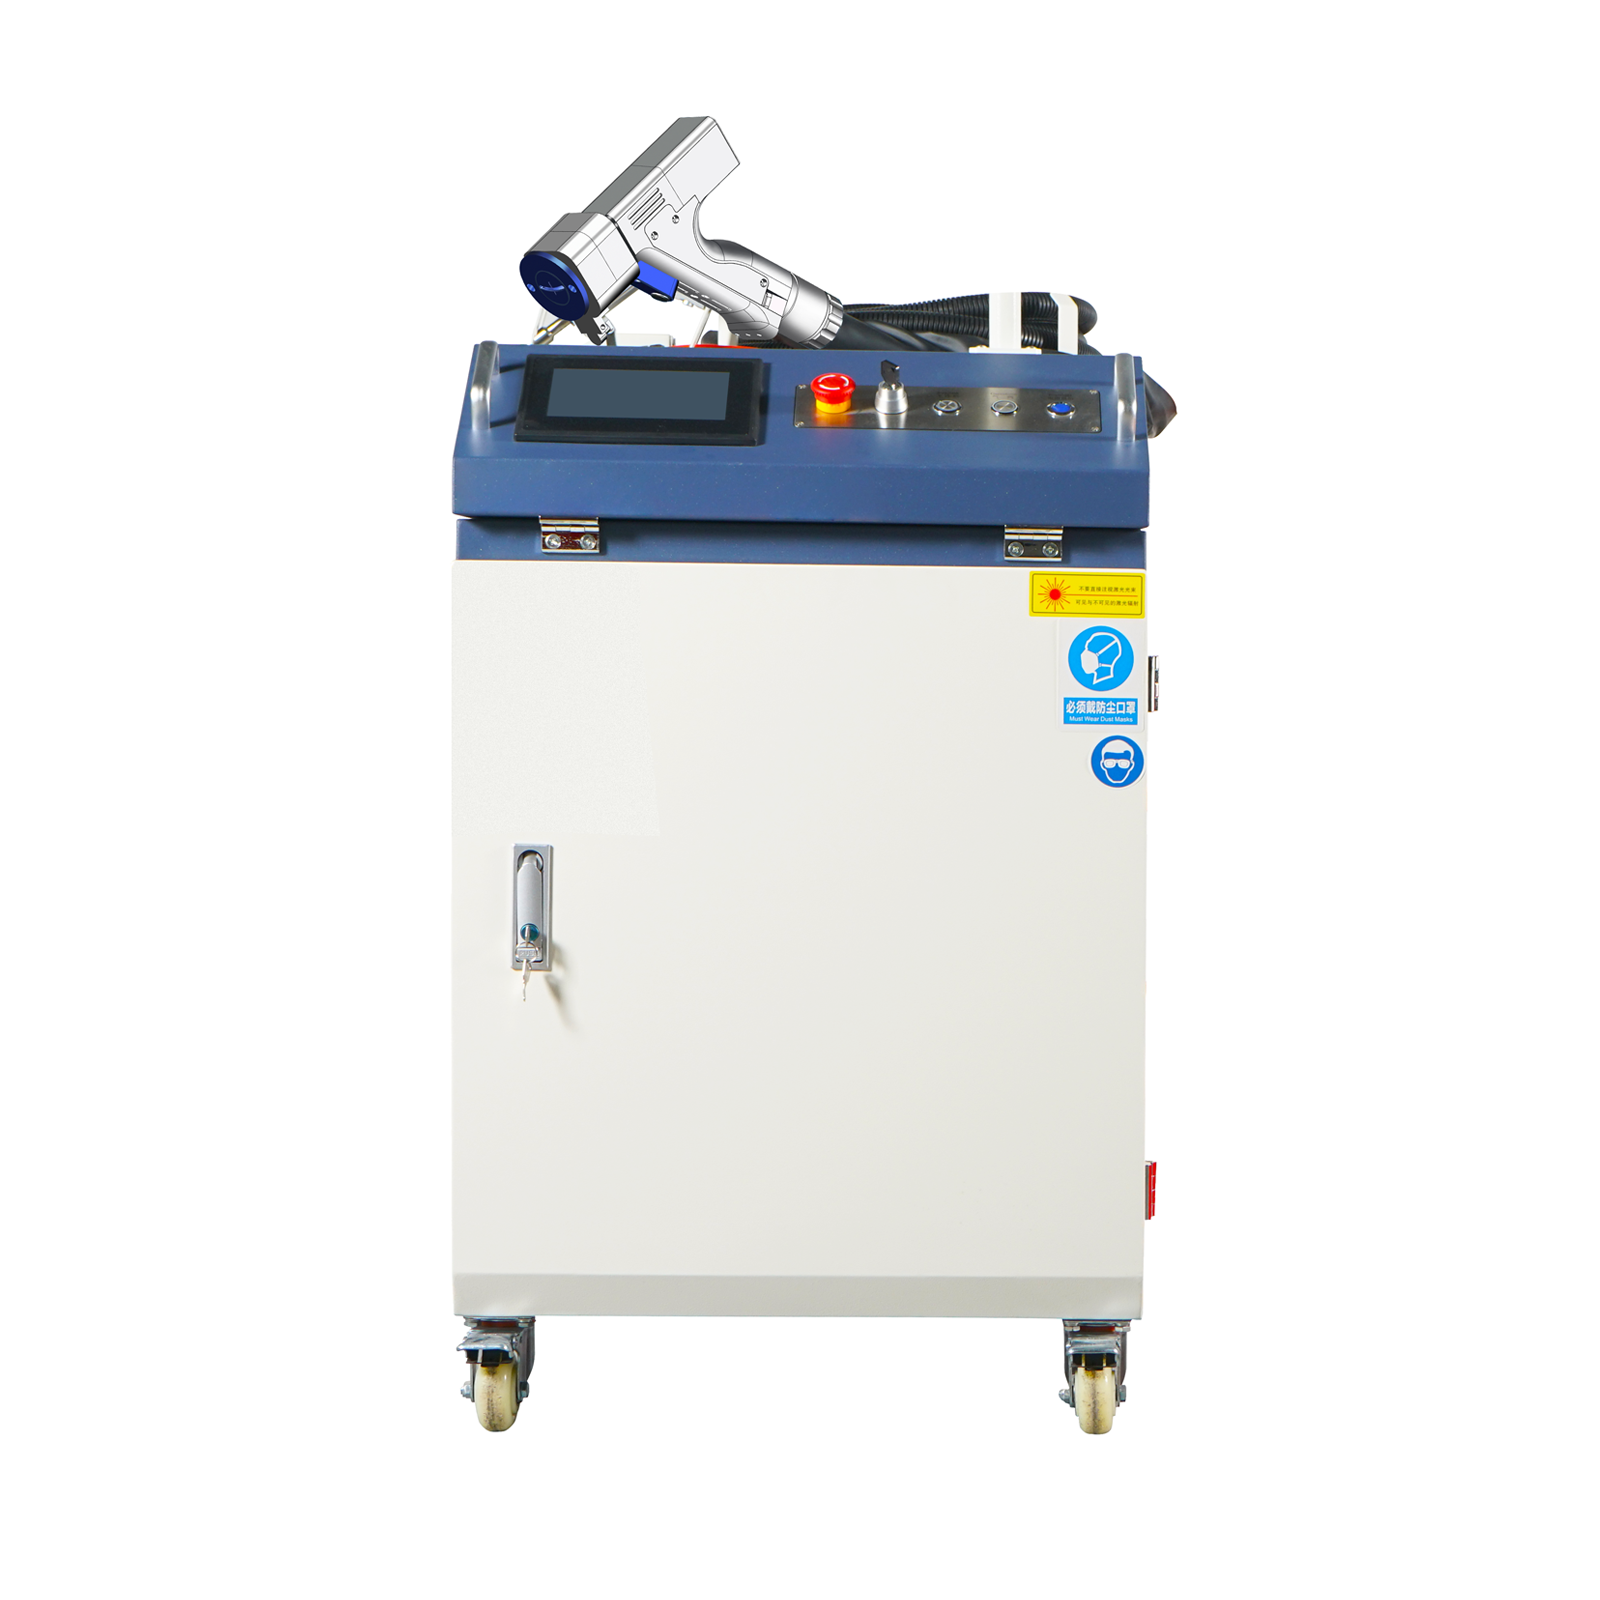 1000W/1500W/2000W Fiber Laser Cleaner for Metal Rust Removal Paint Oil and Coating Cleaning